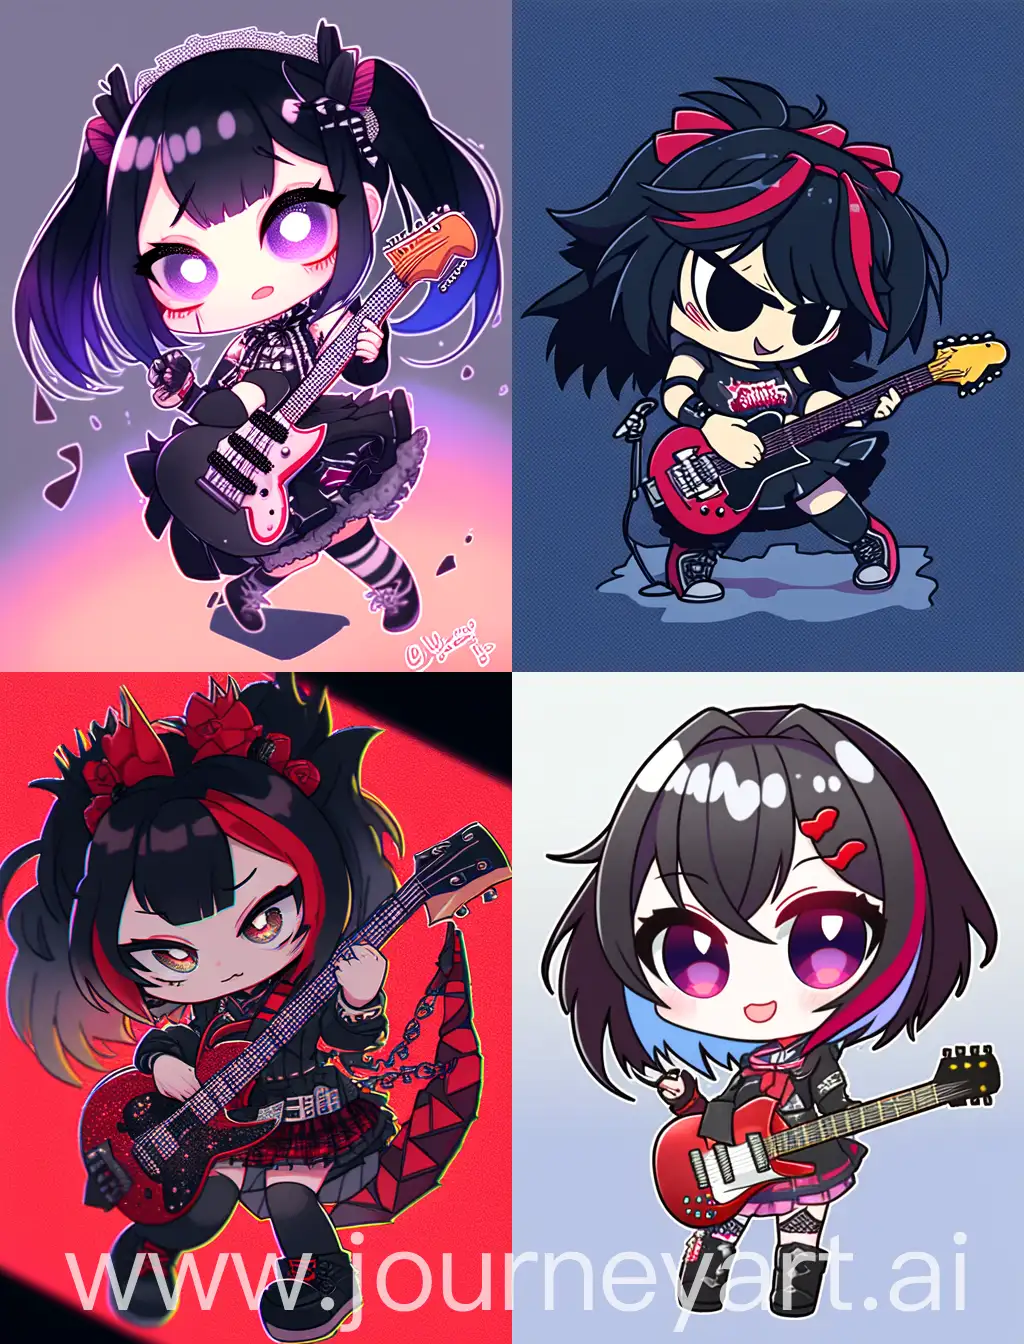 Chibi-Emo-Girl-Playing-Guitar-with-Spooky-Background-in-Anime-Style